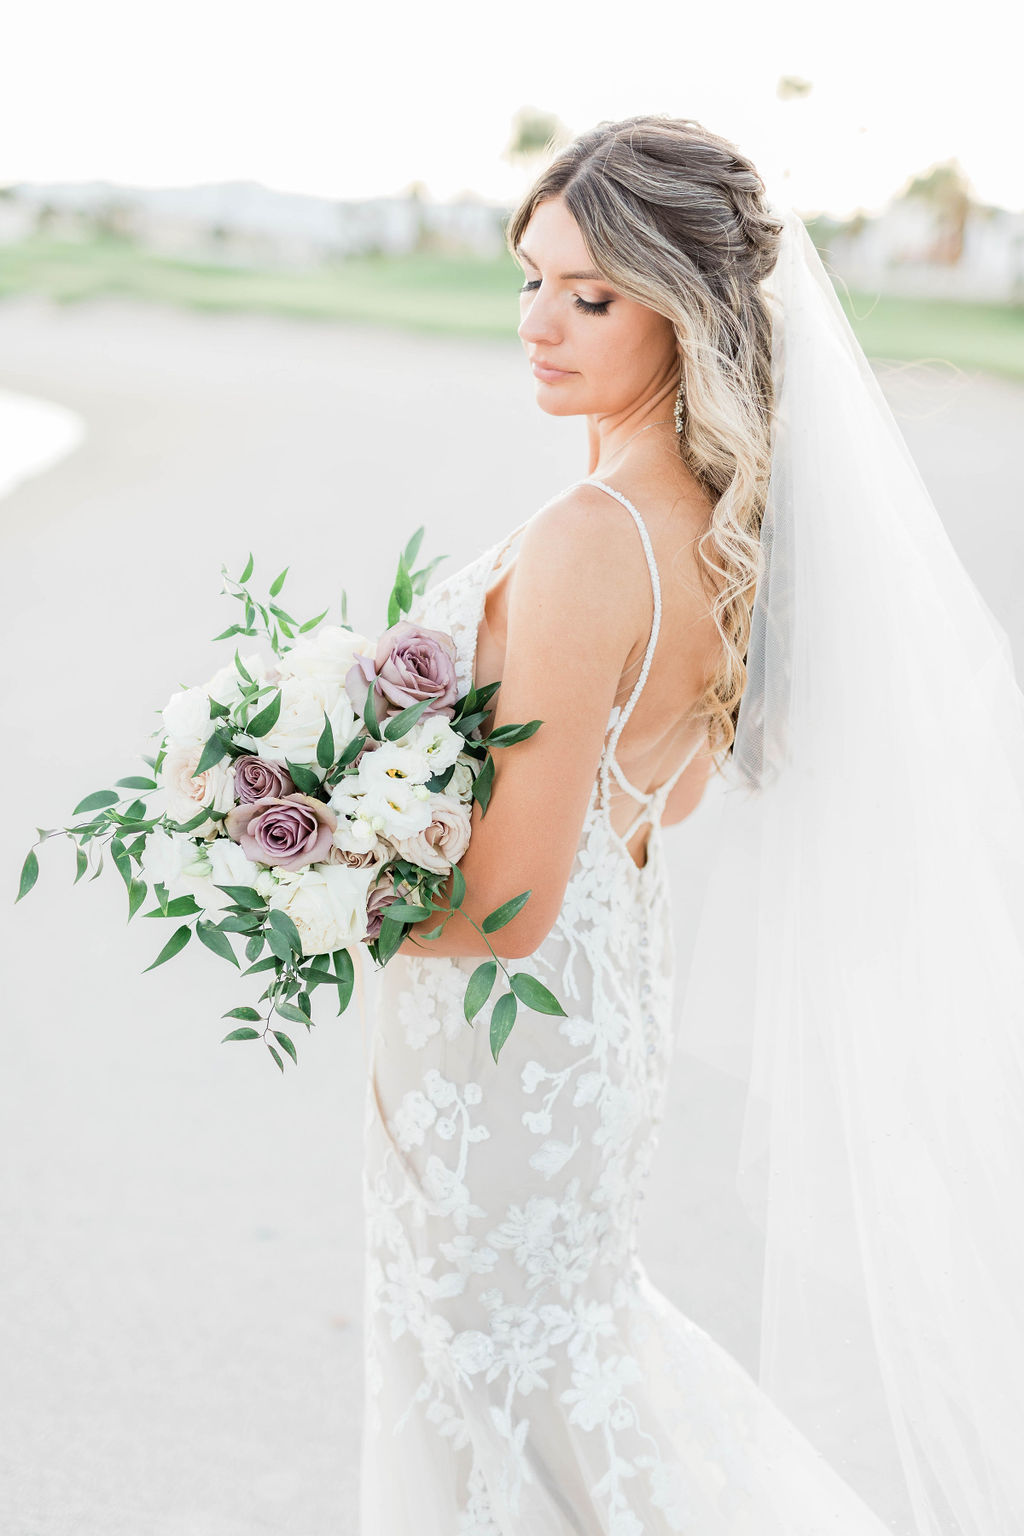 Wedding Hair With A Veil: 4 Stunning Hairstyles That Work